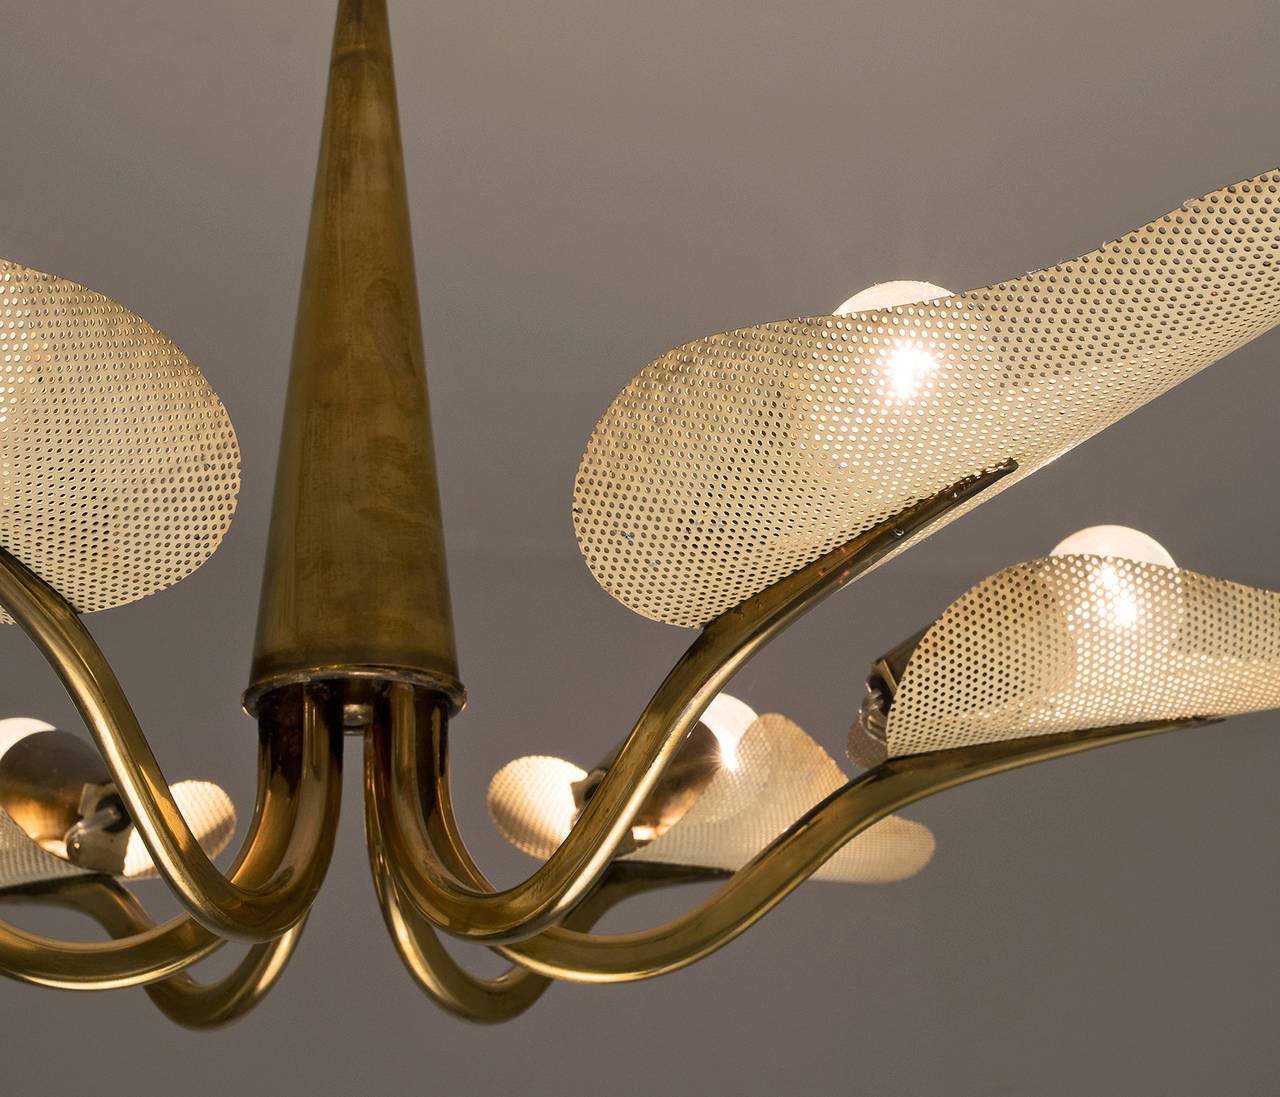 Very elegant chandelier, made in France, late 1950s. 

This wonderful fixture has six elegantly curved arms, with leaf shaped shades in perforated sheet metal. The shades spread a nice diffuse light downwards, and provide clear lighting up as